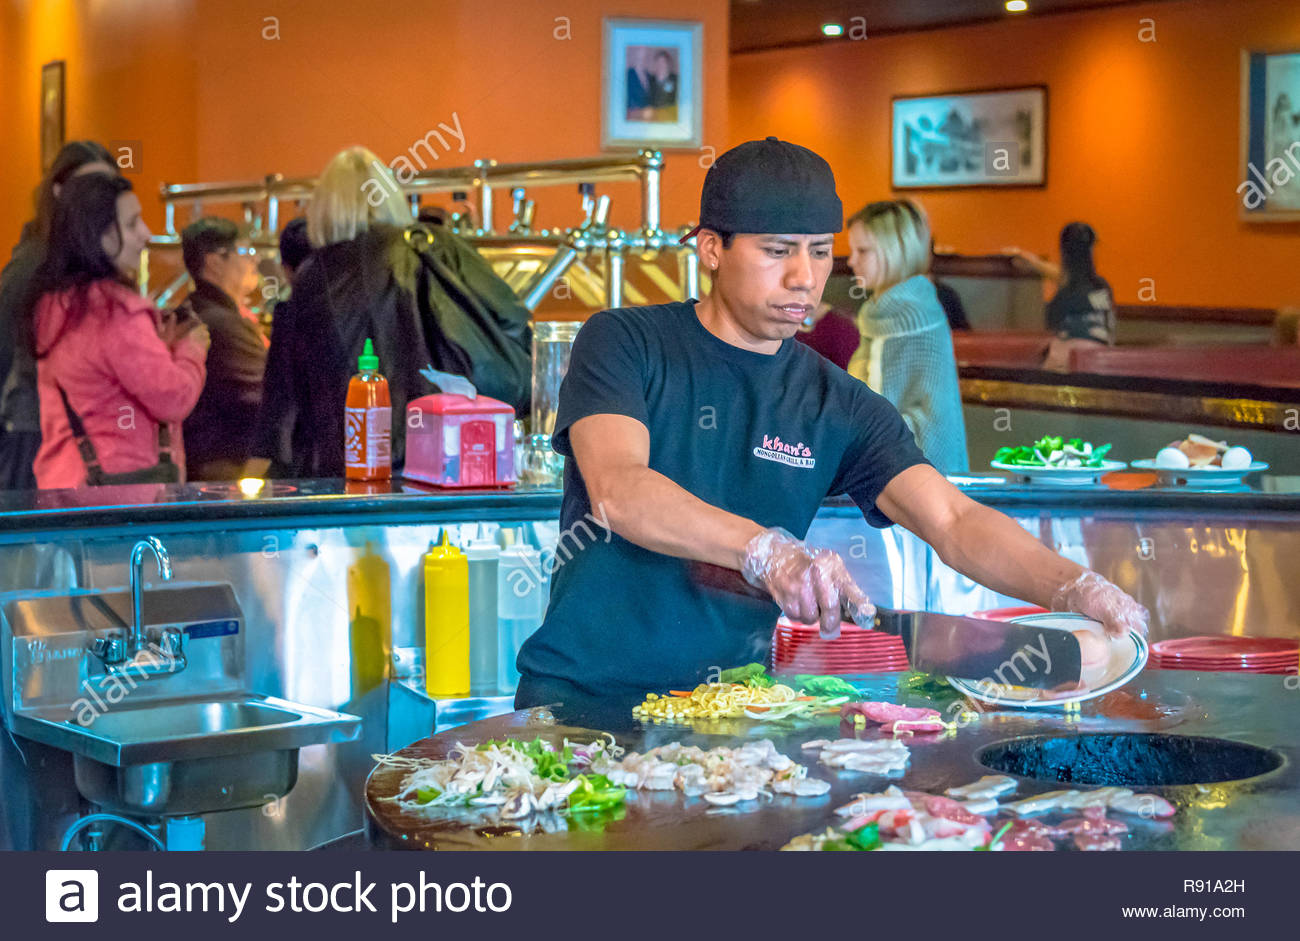 Mongolian Buffet Restaurant Kitchen Scenes In New York City Man Cutting Vegetables On A Large Circular Hot Pan At A Restaurant In Nyc Stock Photo Alamy